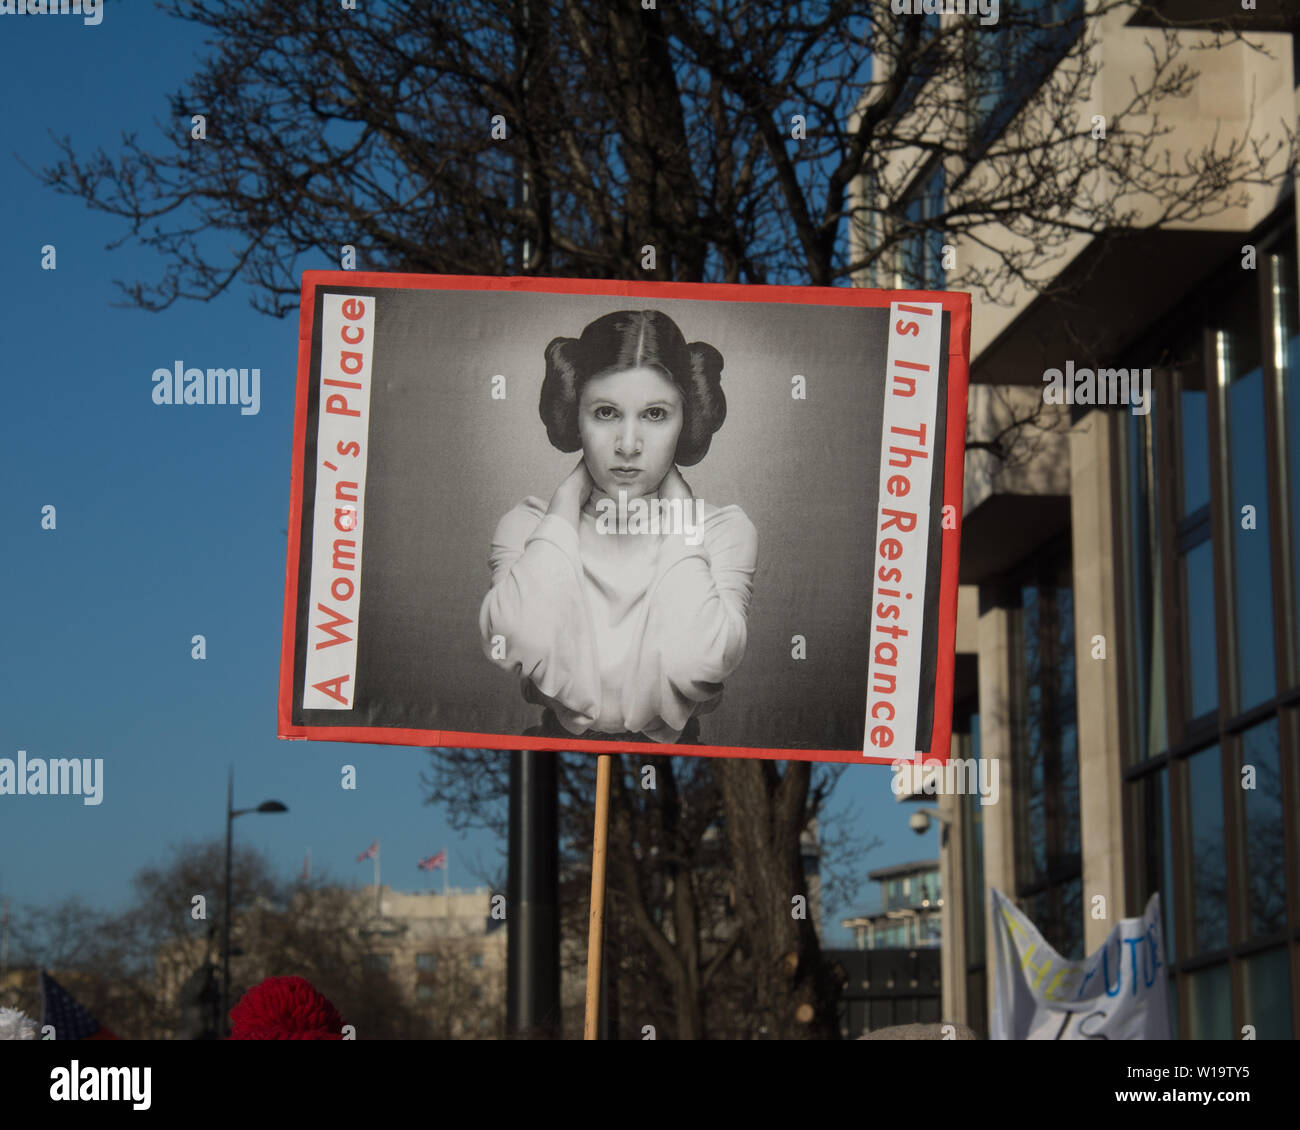 A placard showing Princess Leia and reading 'A woman's place is in the resistance' carried during the Women's march in London, January 2017 Stock Photo